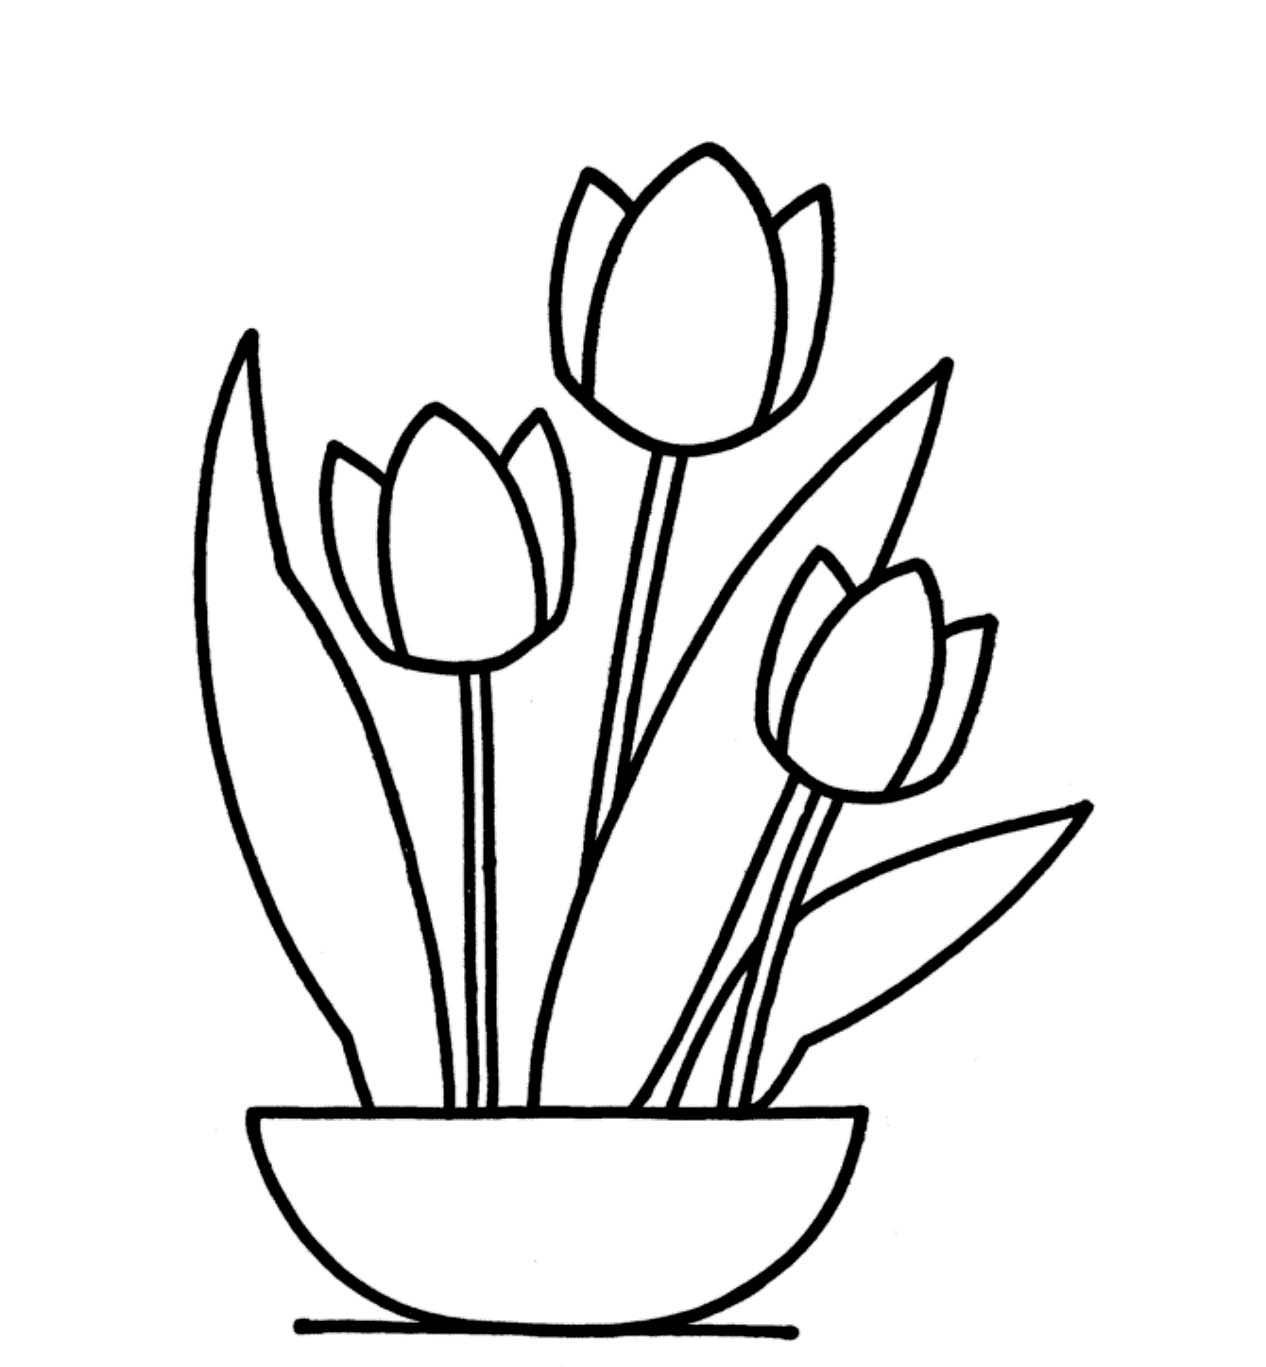 Printable Tulip Coloring Pages | Coloring Me